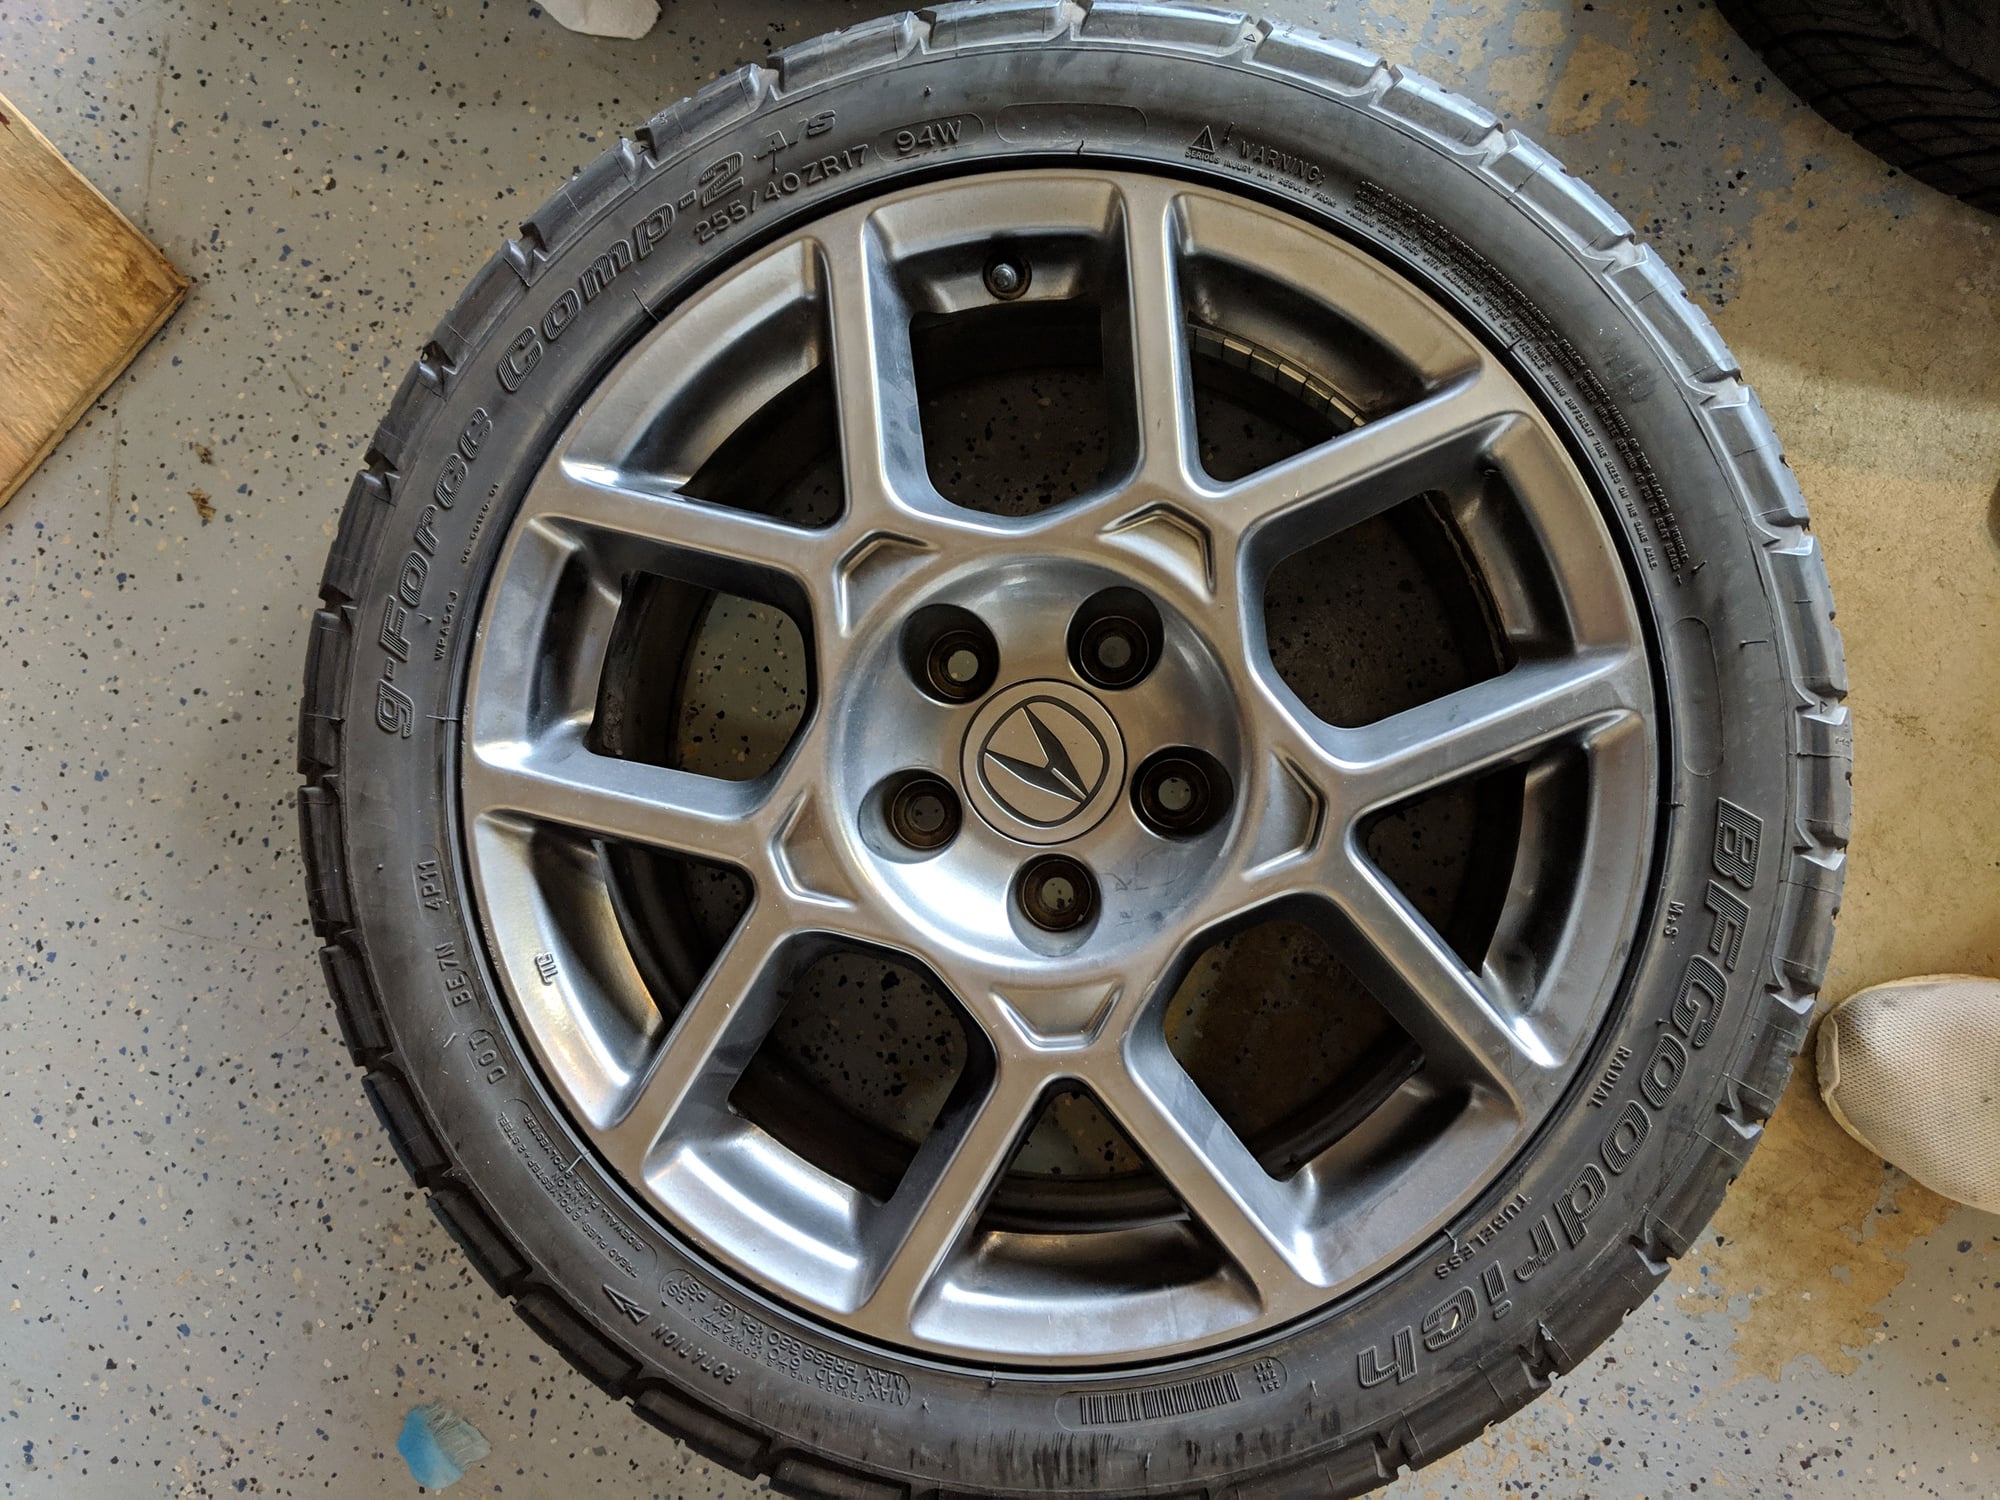 Wheels and Tires/Axles - SOLD: TL Type S wheels - Used - 2004 to 2008 Acura TL - Saint Louis, MO 63026, United States